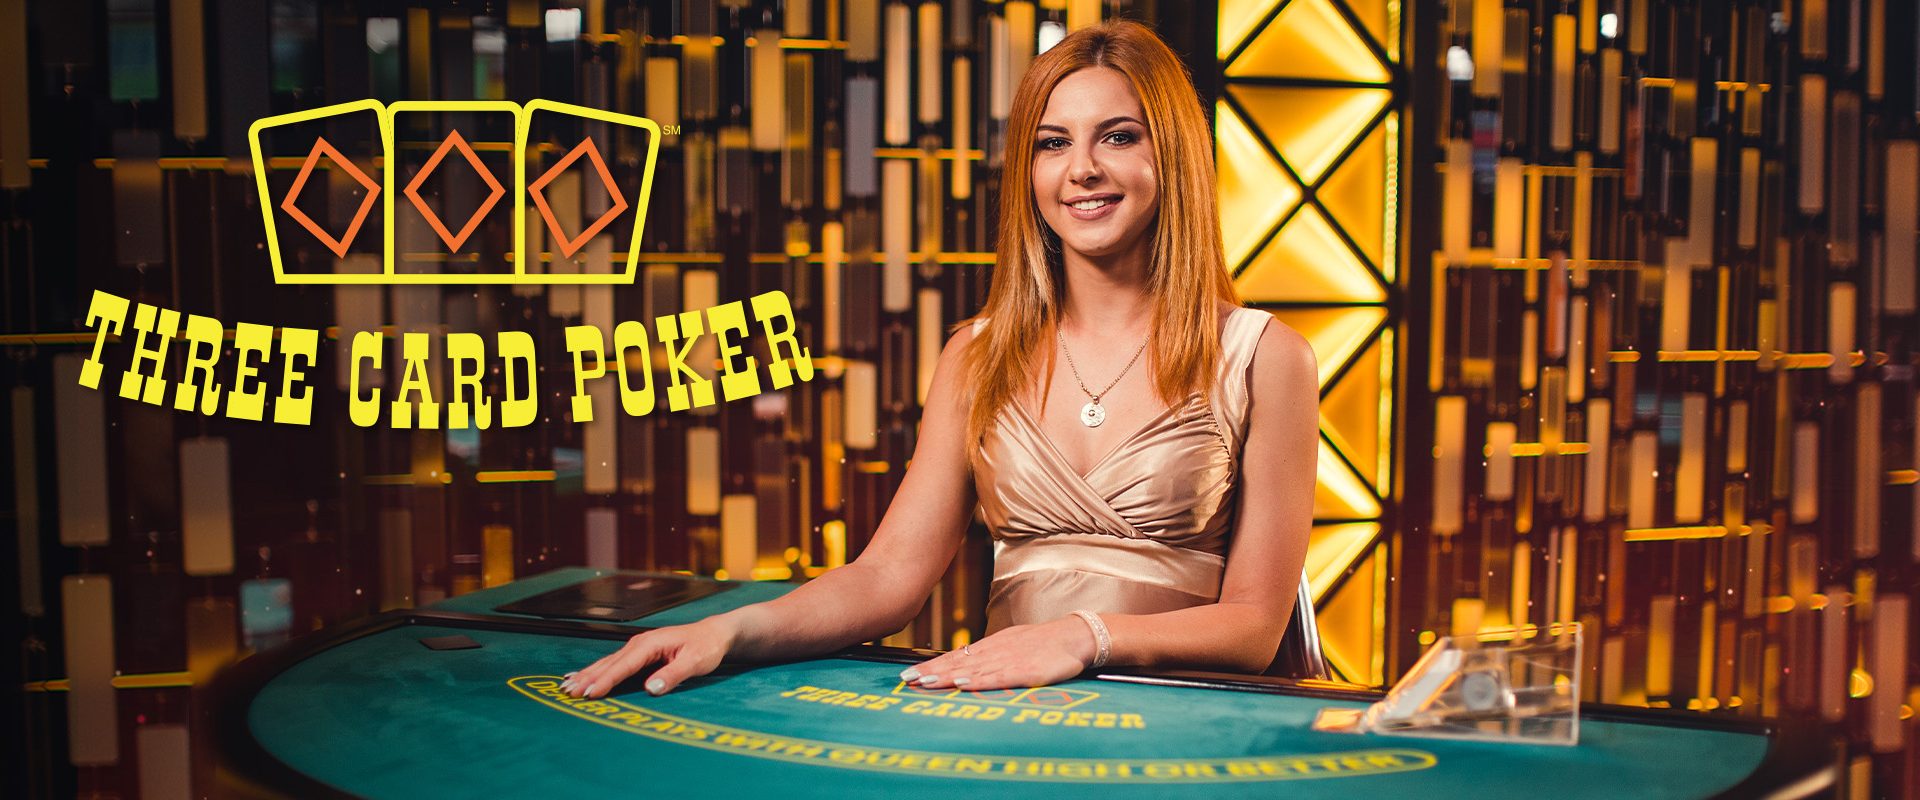 The Live Casino Game Three Card Poker from Evolution